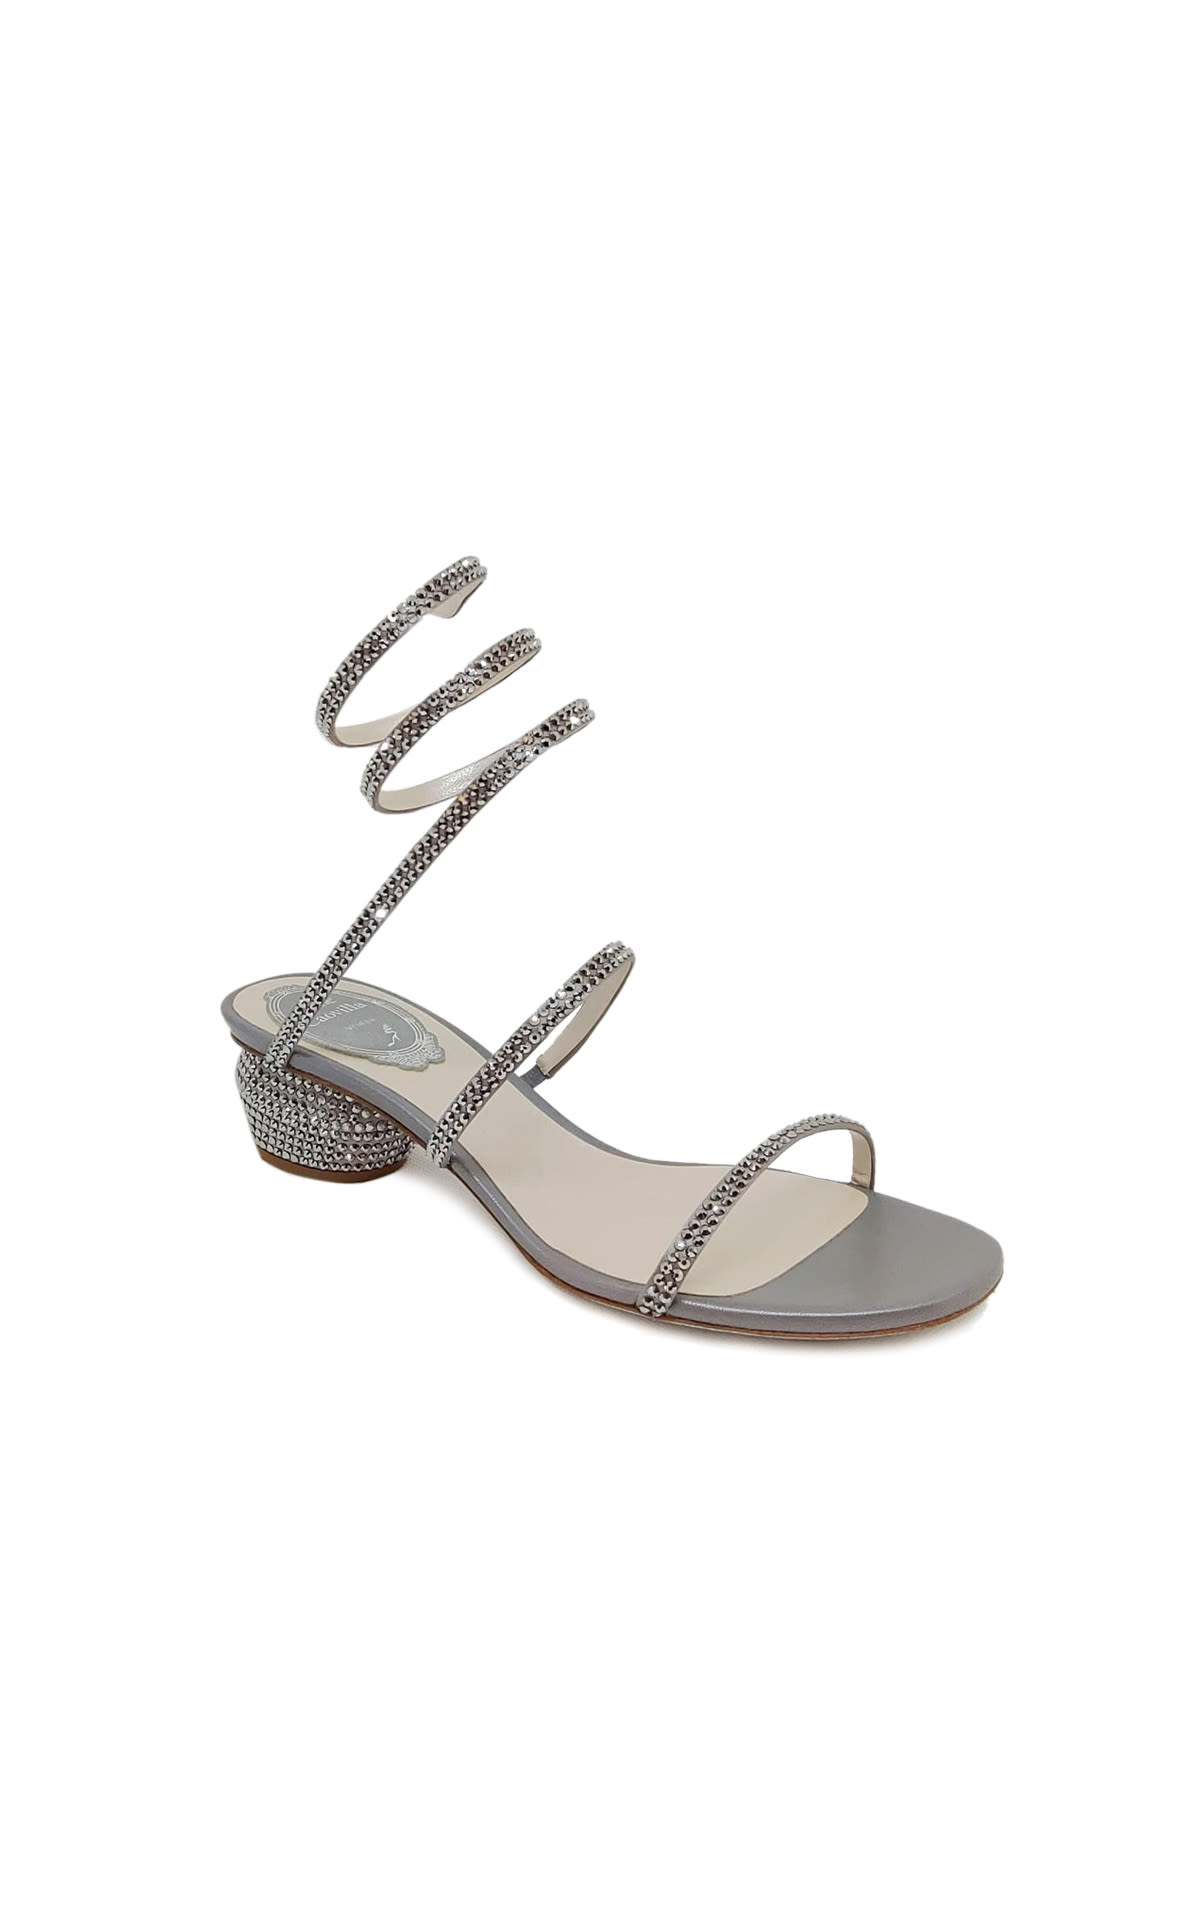 Cleo sandals in satin gray